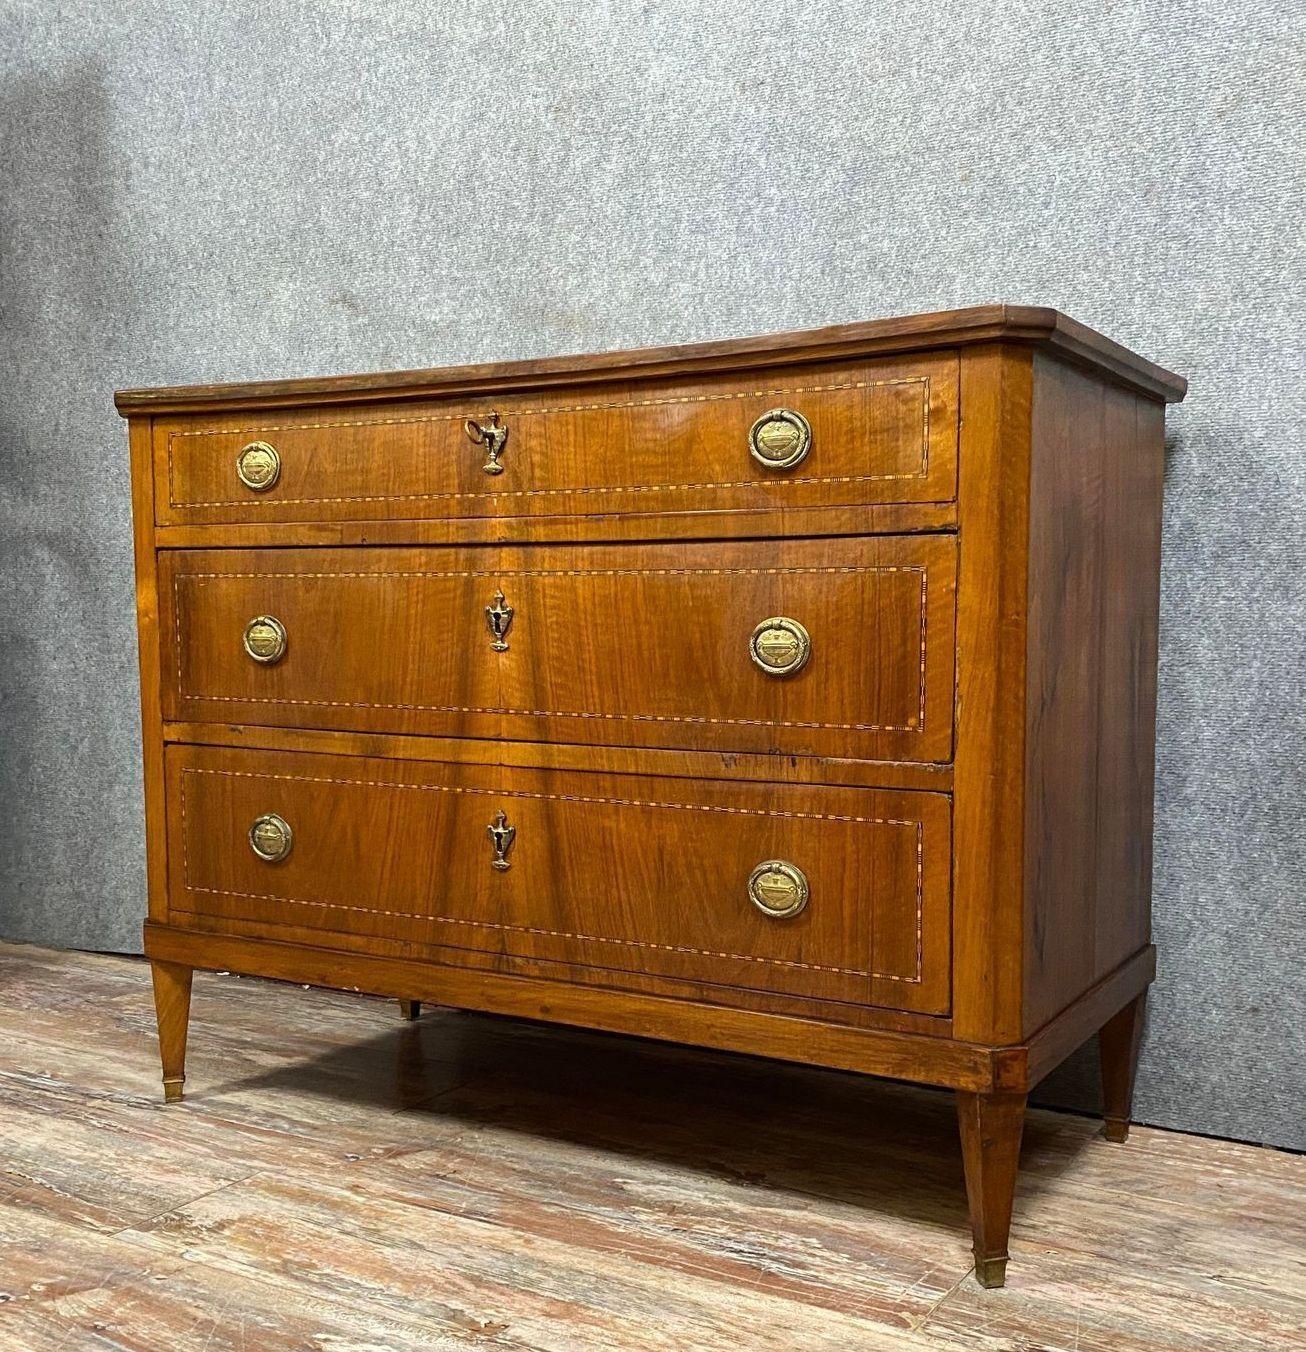 Step into the grandeur of the 19th century with this exceptional Louis XVI mahogany and marquetry commode, crafted around 1850. This exquisite piece exudes timeless elegance and impeccable craftsmanship, reflecting the opulence of the Louis XVI